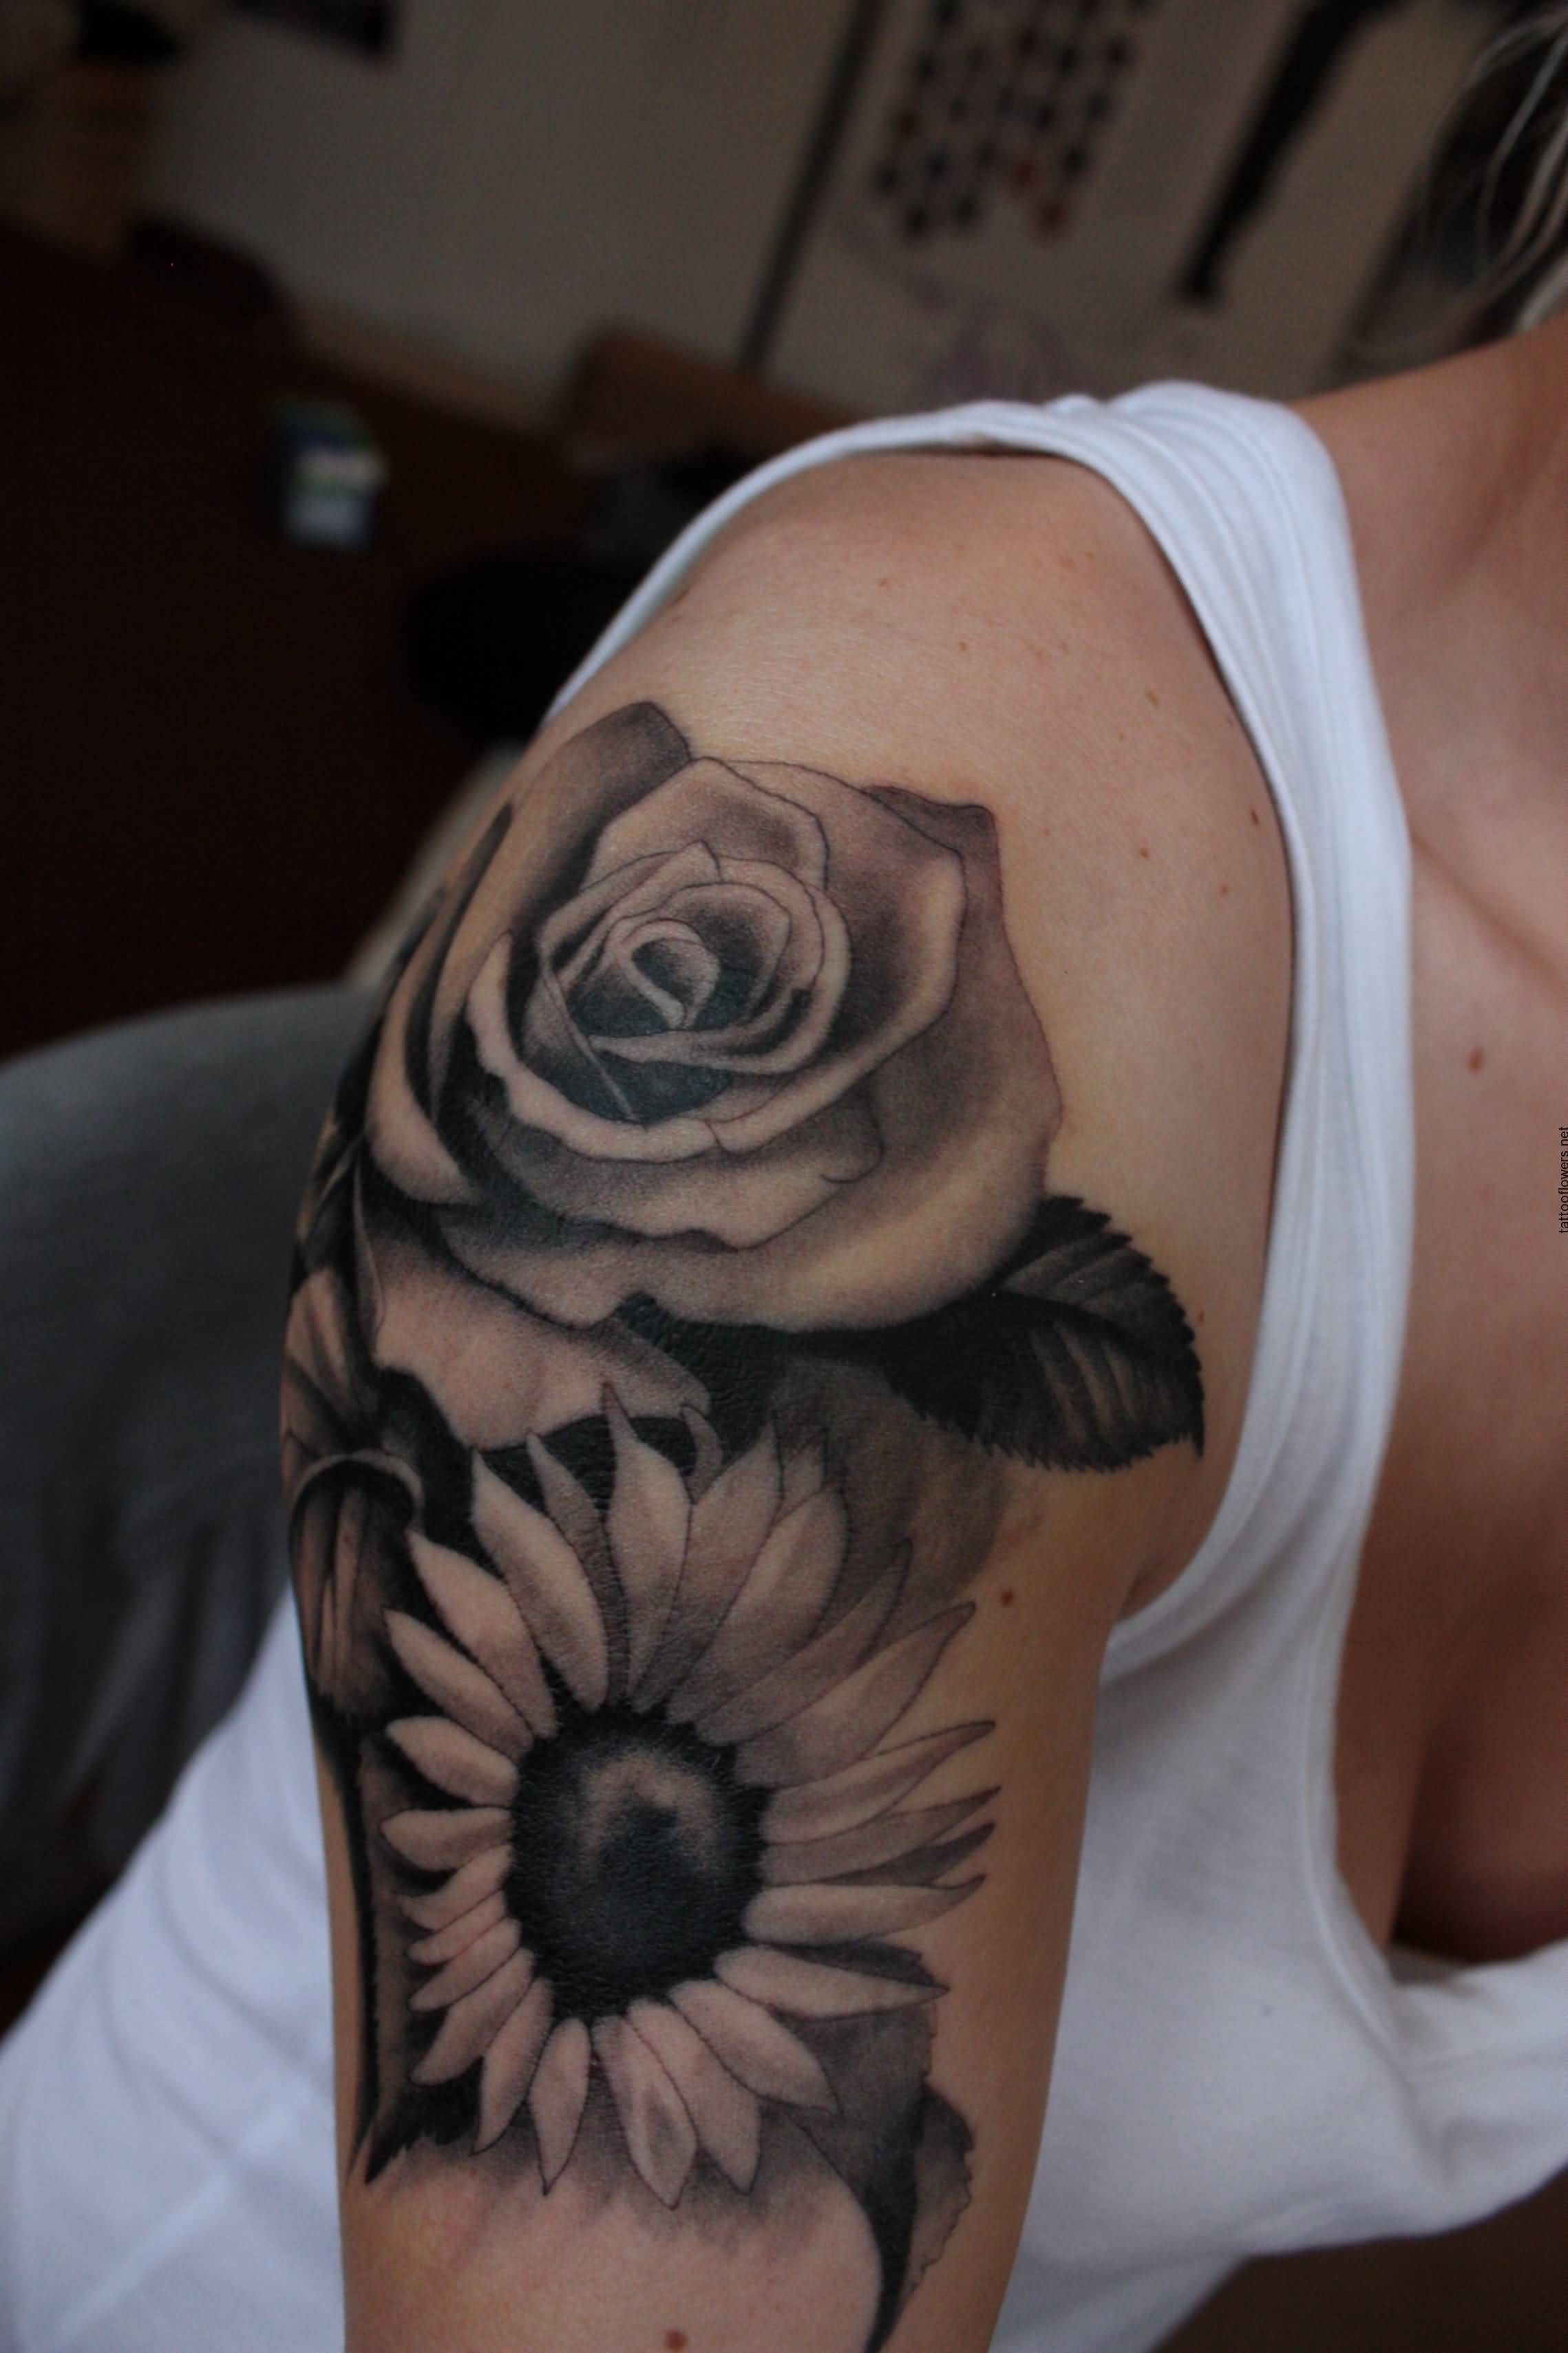 Right Half Sleeve Rose Flower And Realistic Sunflower Tattoo